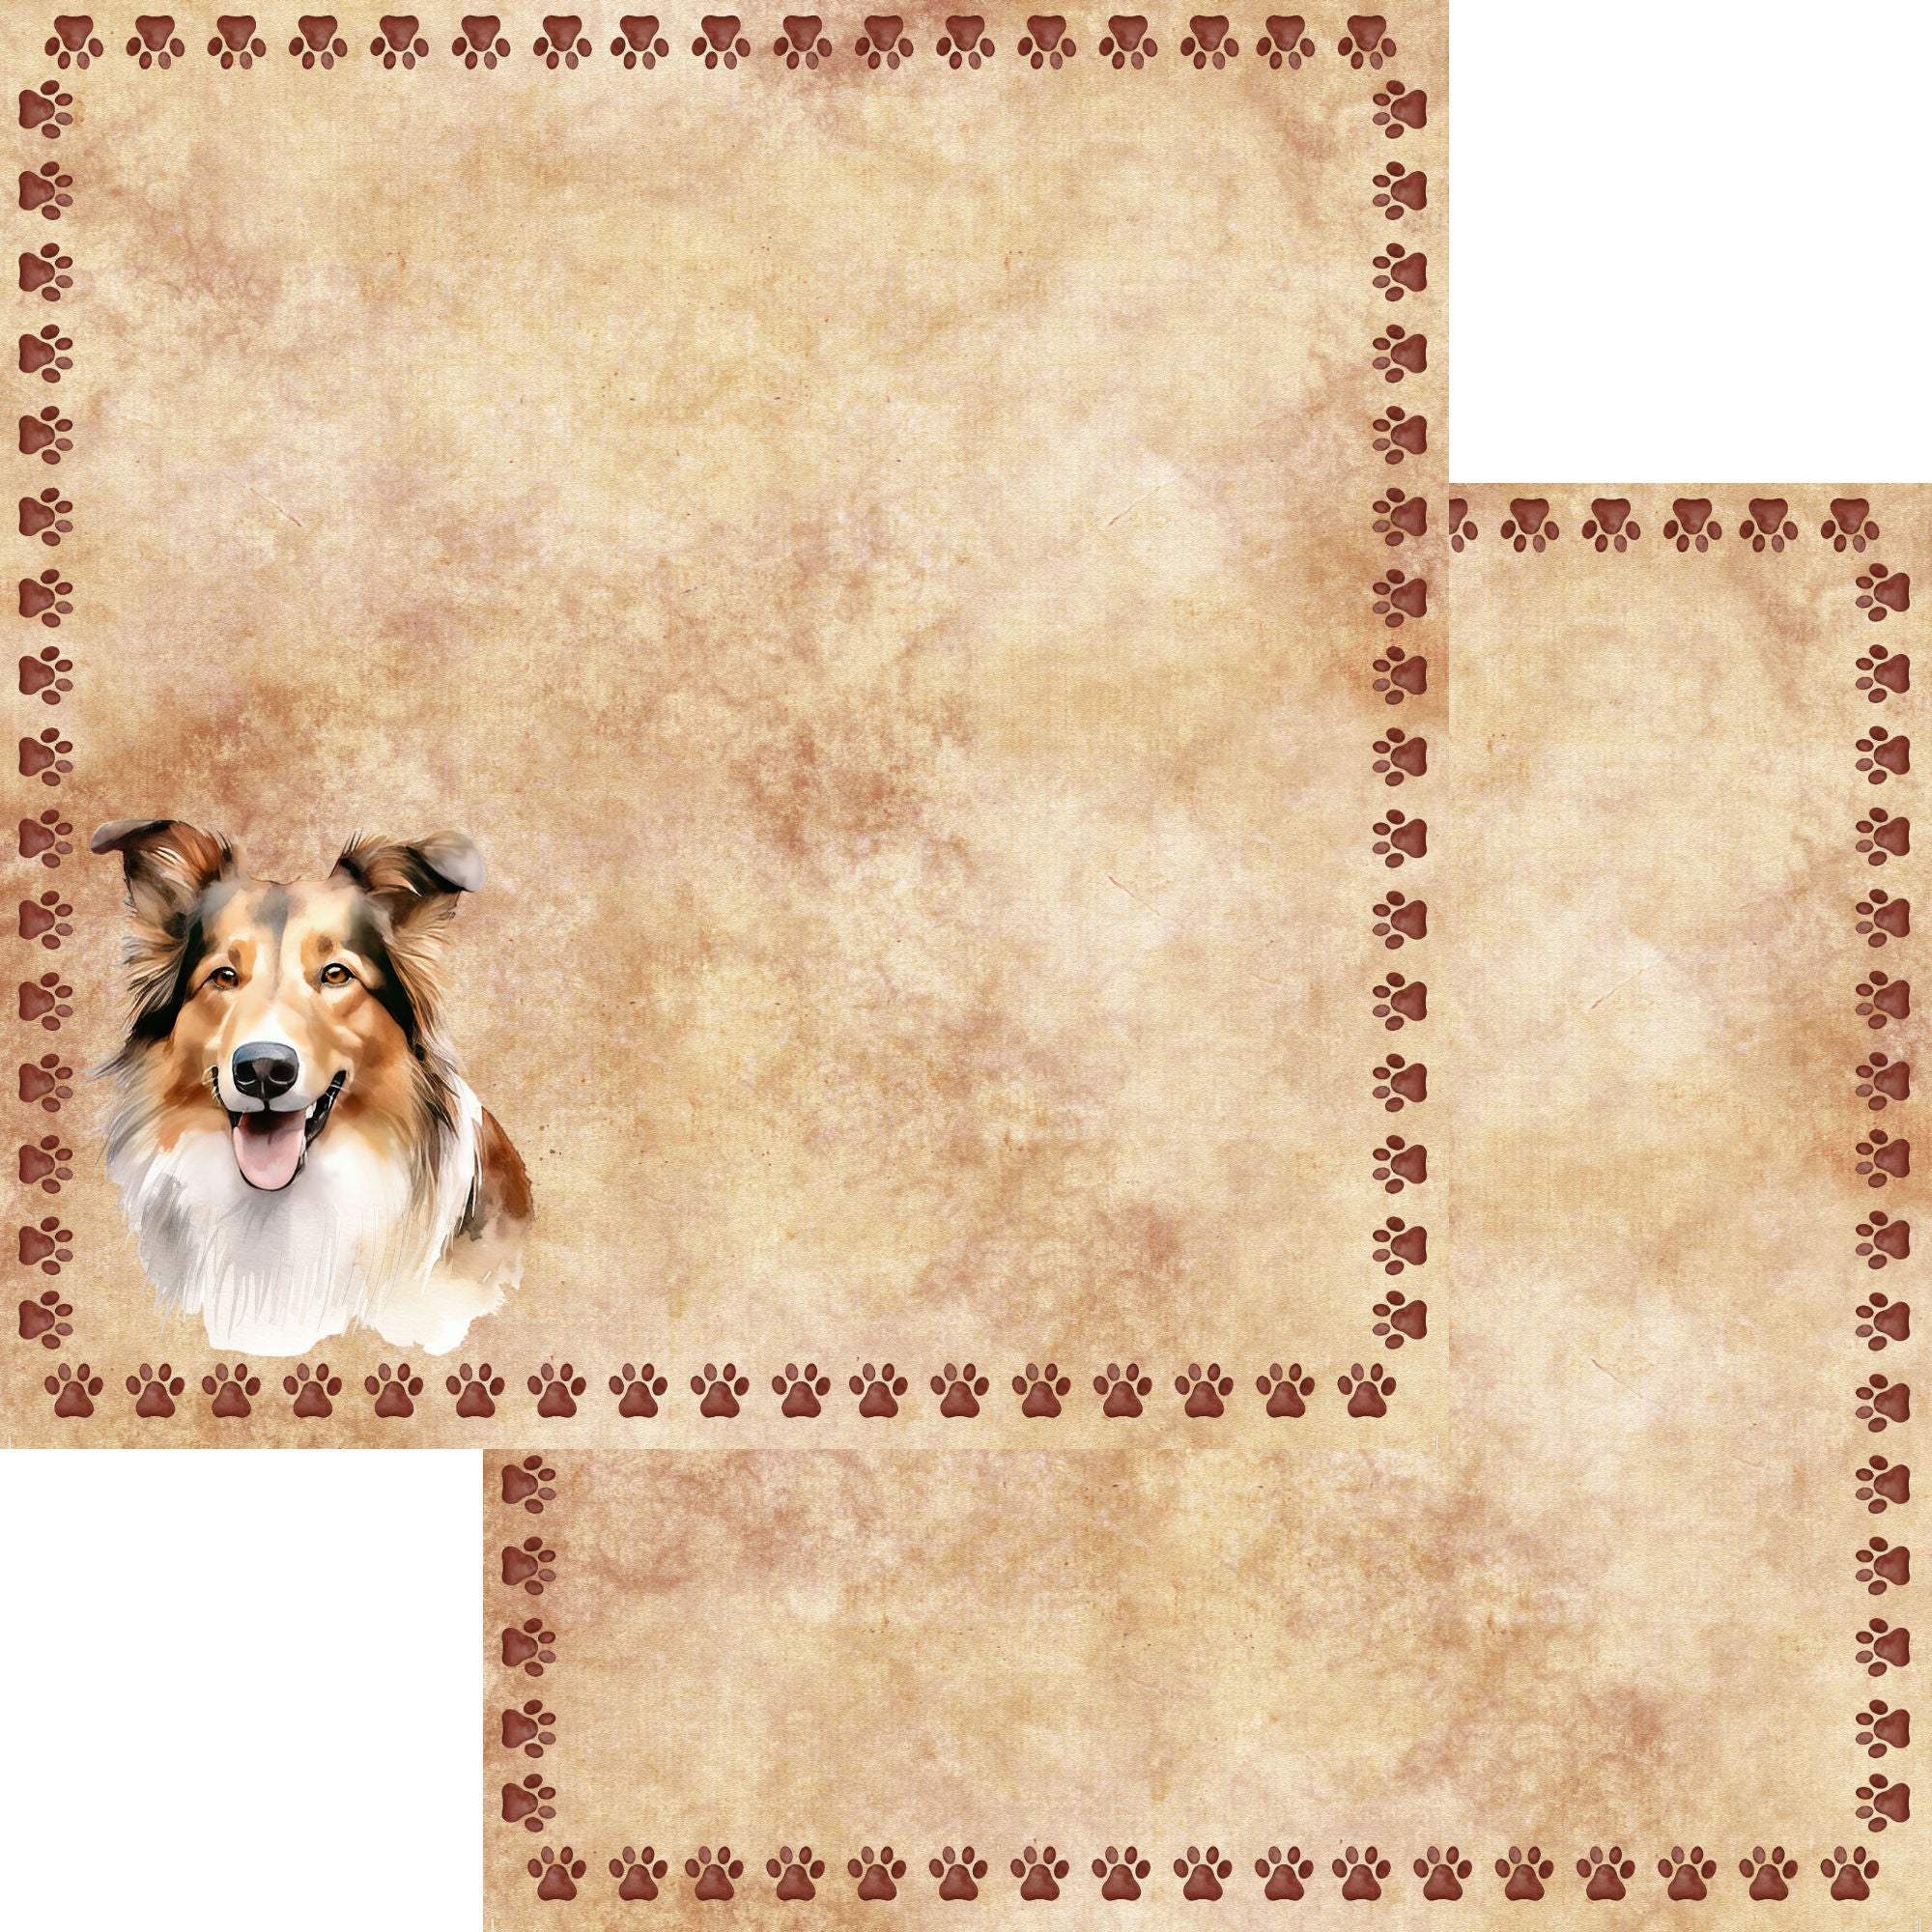 Dog Breeds Collection Collie 12 x 12 Double-Sided Scrapbook Paper by SSC Designs